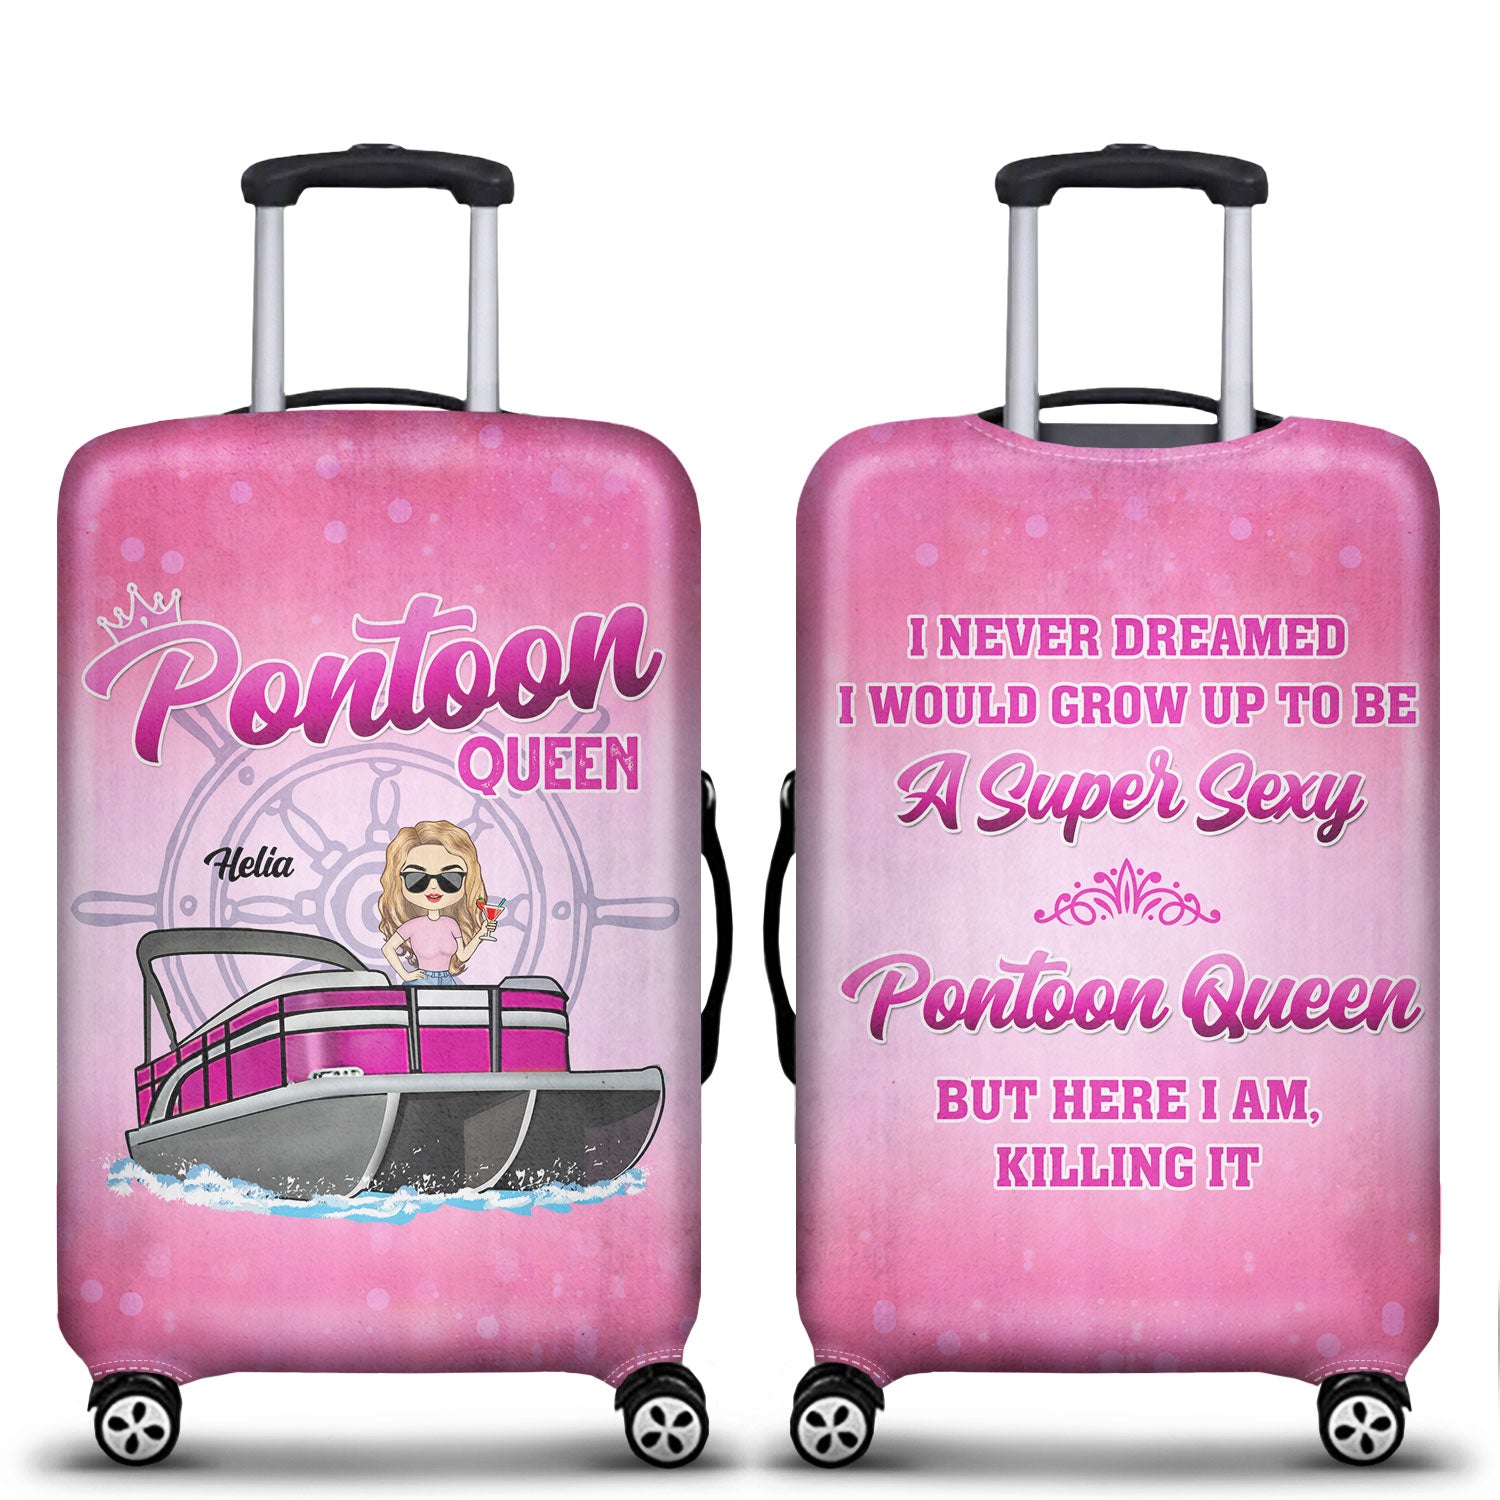 Never Dreamed I'd Grow Up To Be A Super Sexy Pontoon Queen - Traveling, Cruising Gift For Pontooning Lovers, Lake Lovers, Travelers, Women - Personalized Custom Luggage Cover